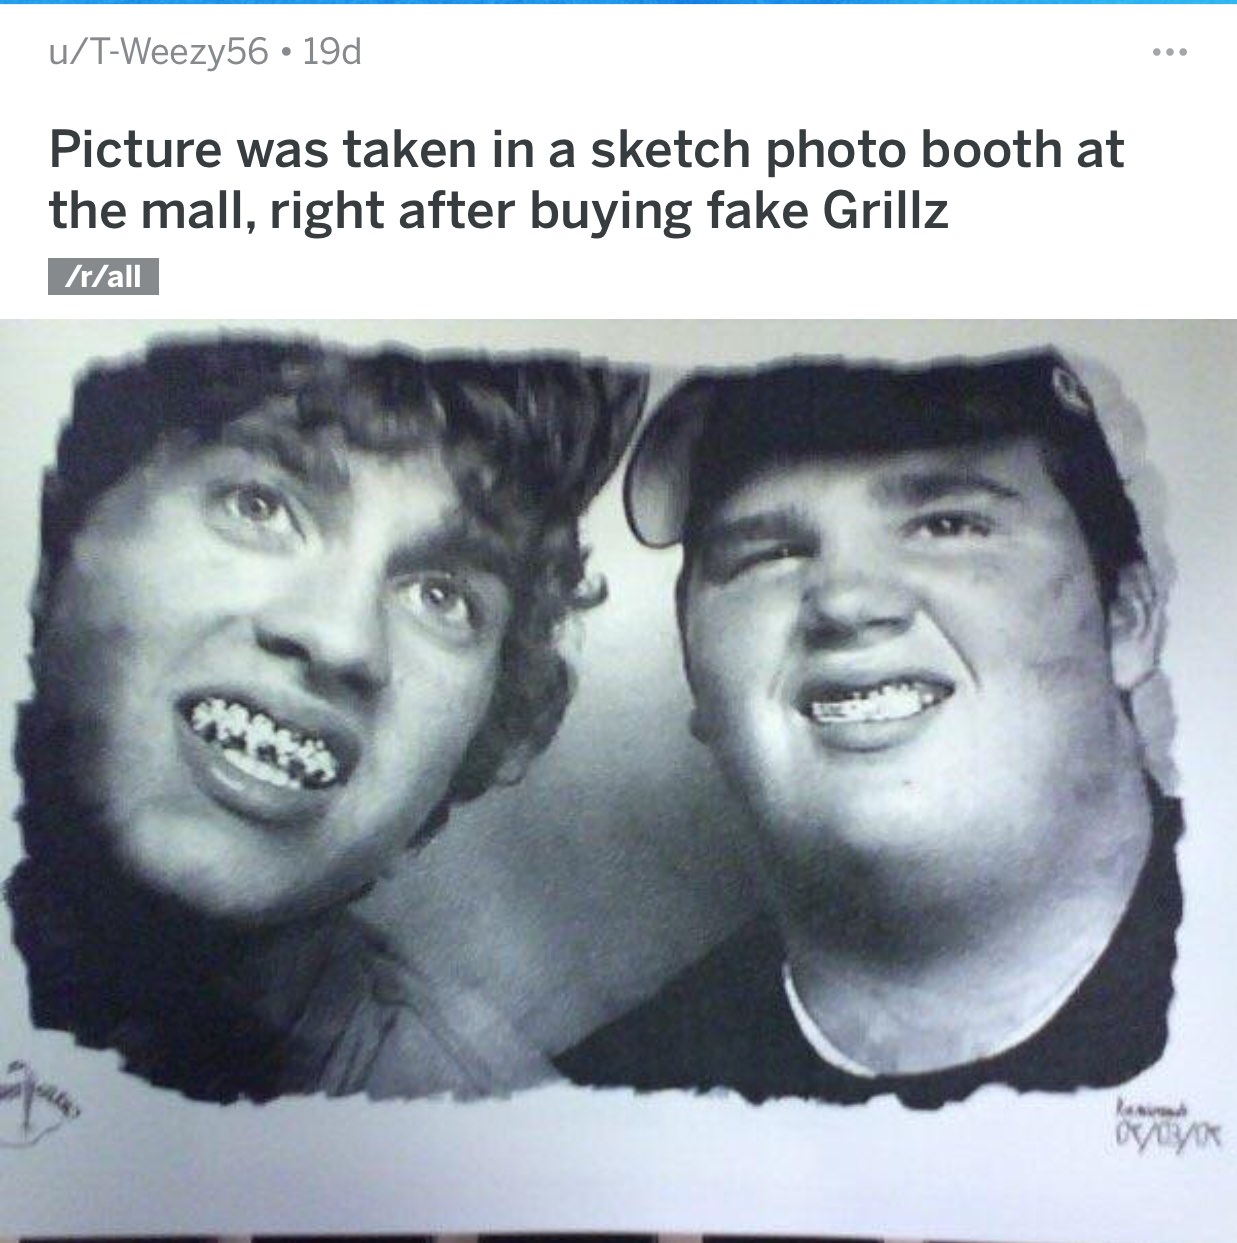 smile - uTWeezy56 19d Picture was taken in a sketch photo booth at the mall, right after buying fake Grillz rall